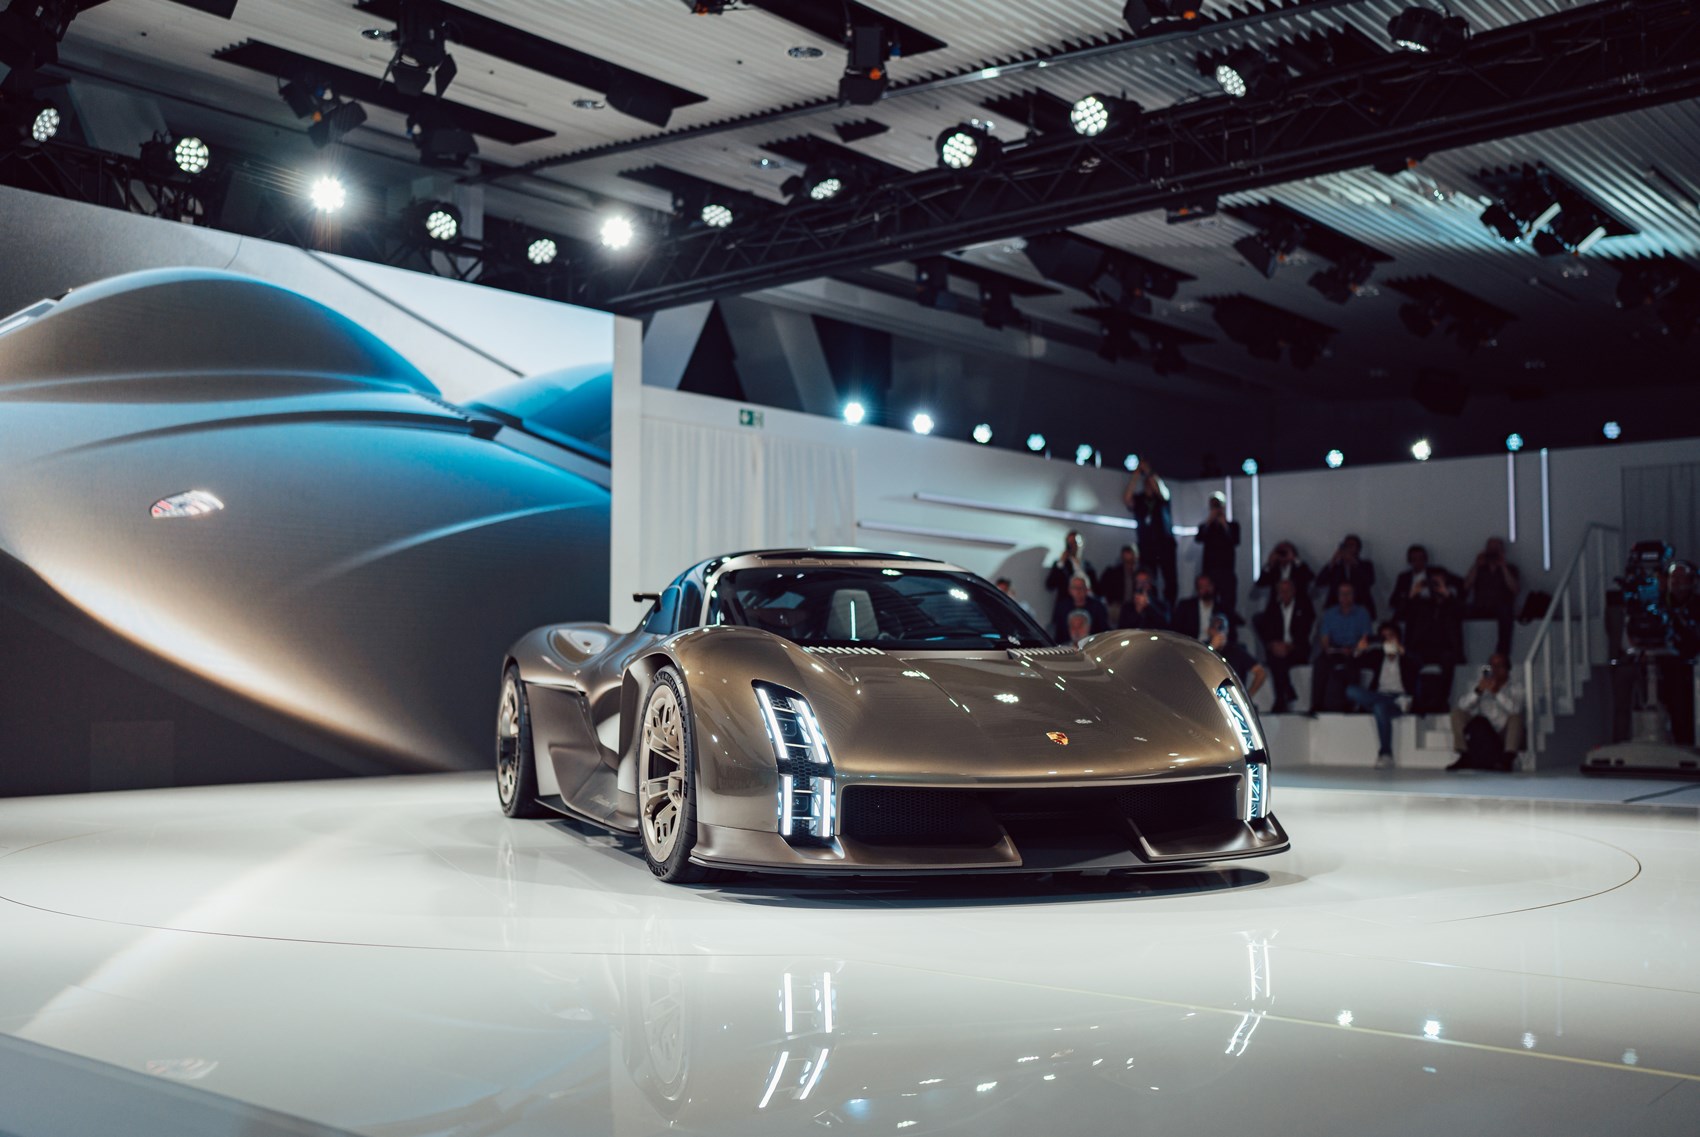 Porsche's New Electric Hypercar Concept Unveiled: First Look at